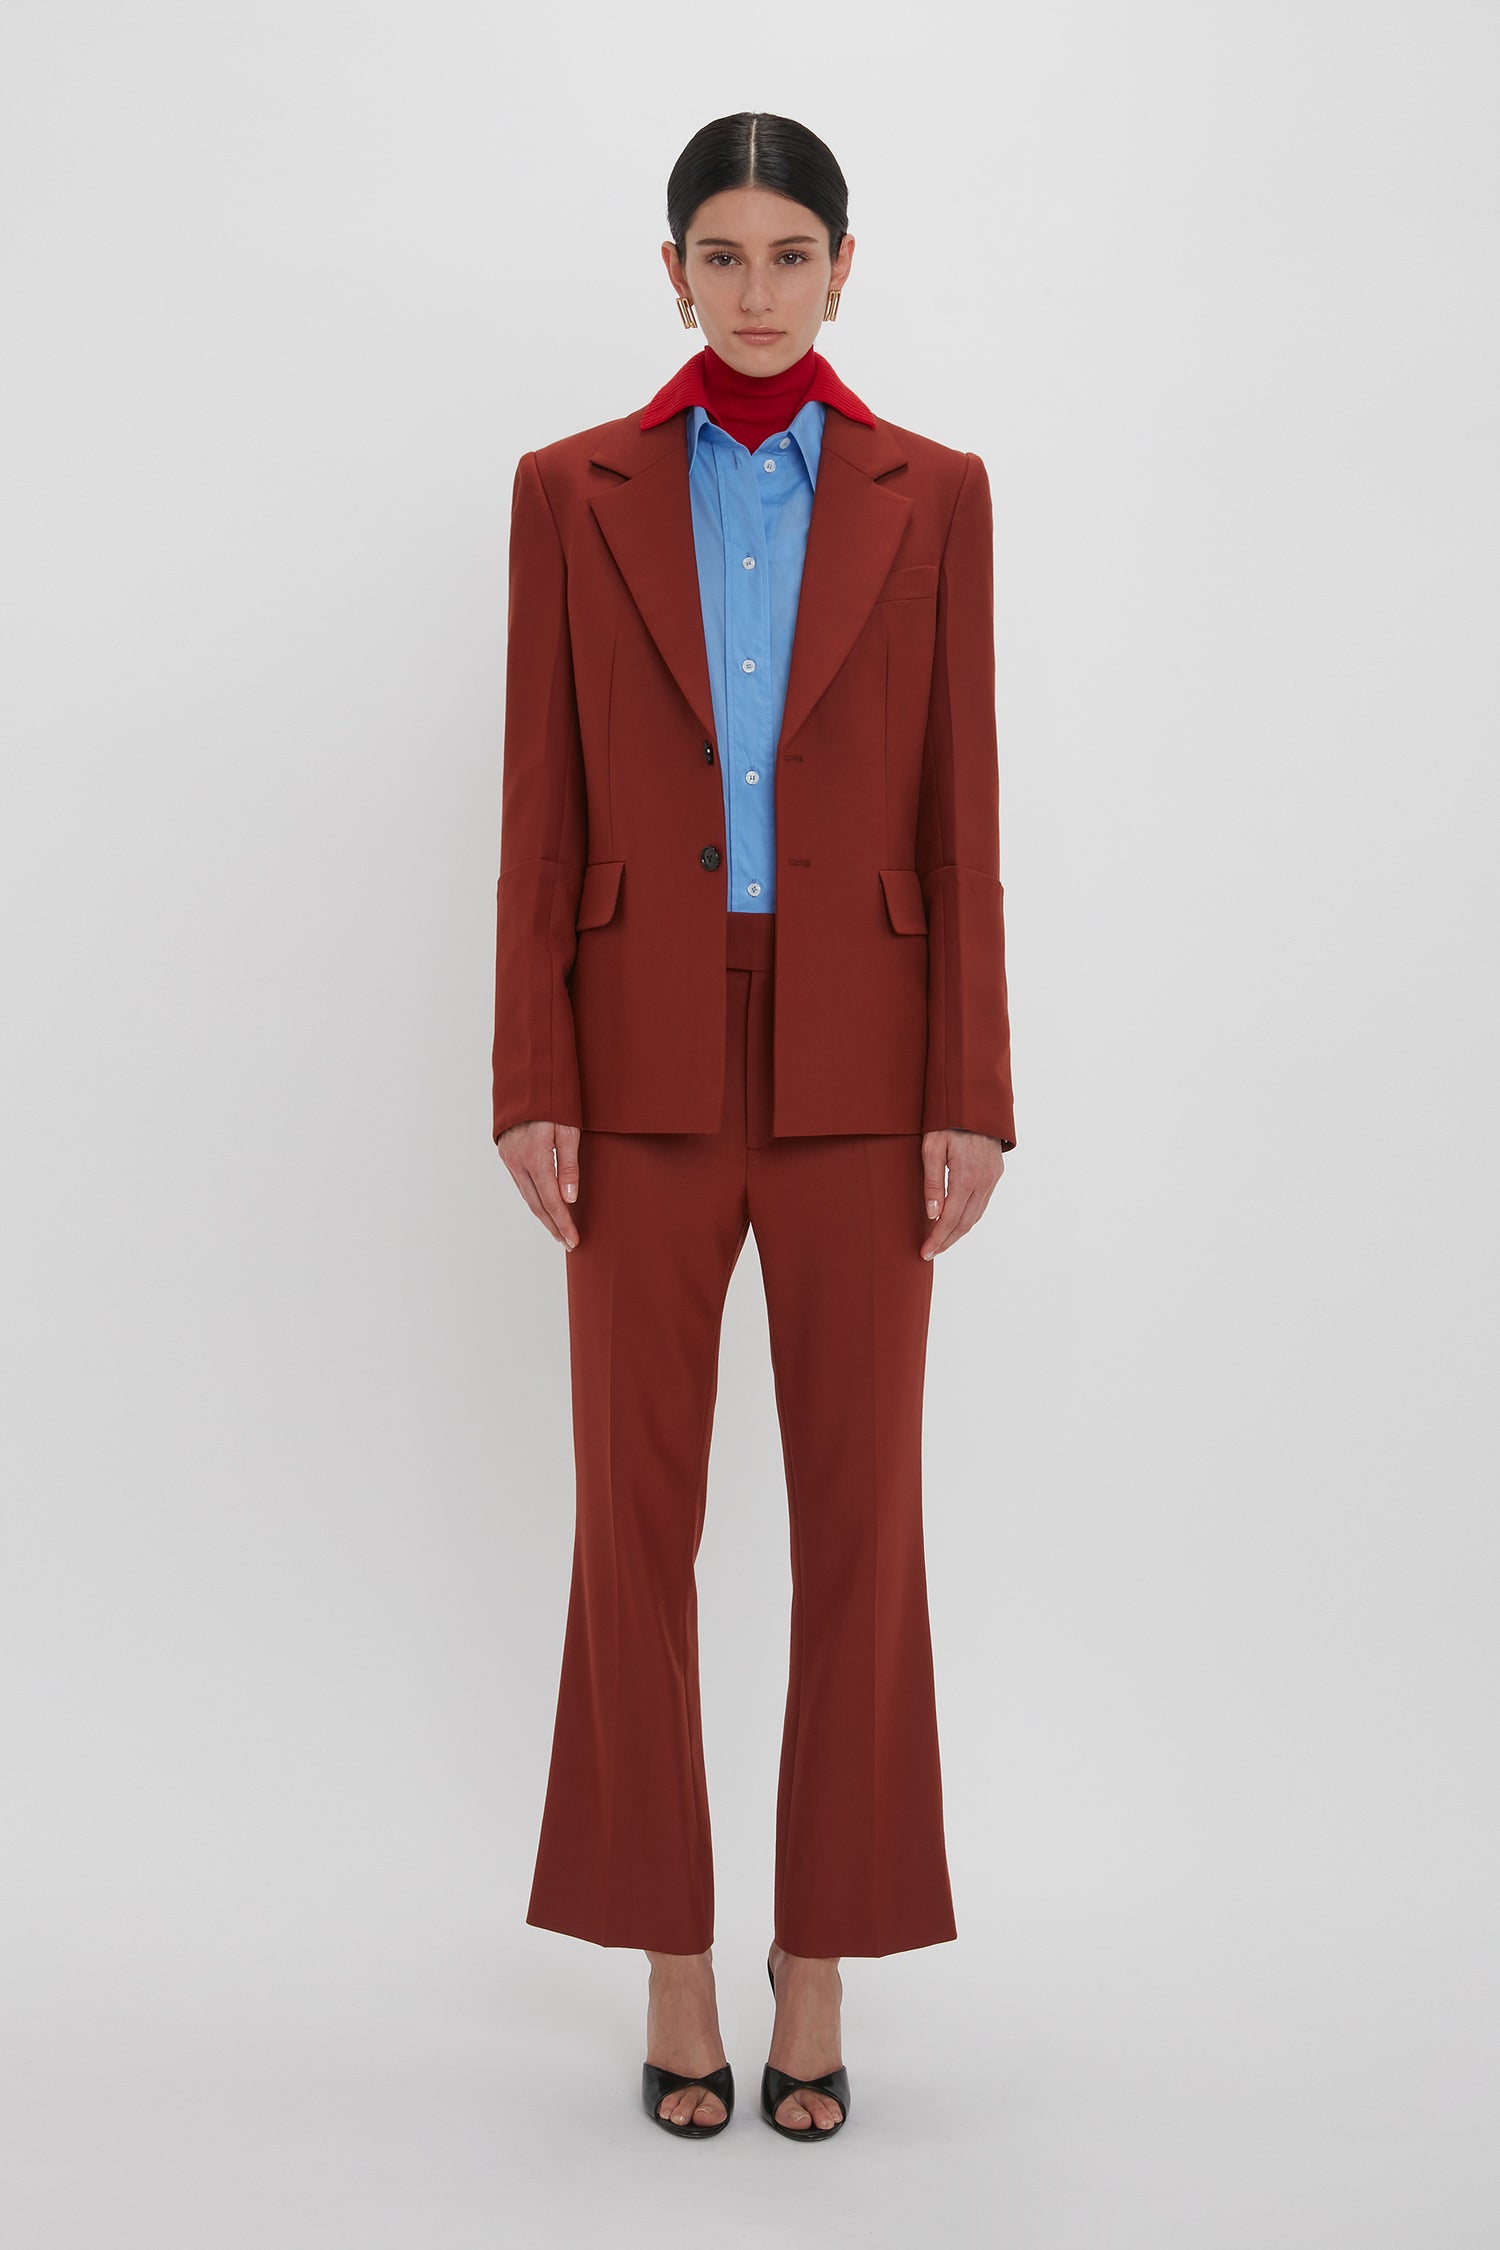 A person is standing against a plain background, wearing a rust-colored suit featuring contemporary detailing with a blue shirt and red scarf. They are also wearing the Sleeve Detail Patch Pocket Jacket In Russet by Victoria Beckham.